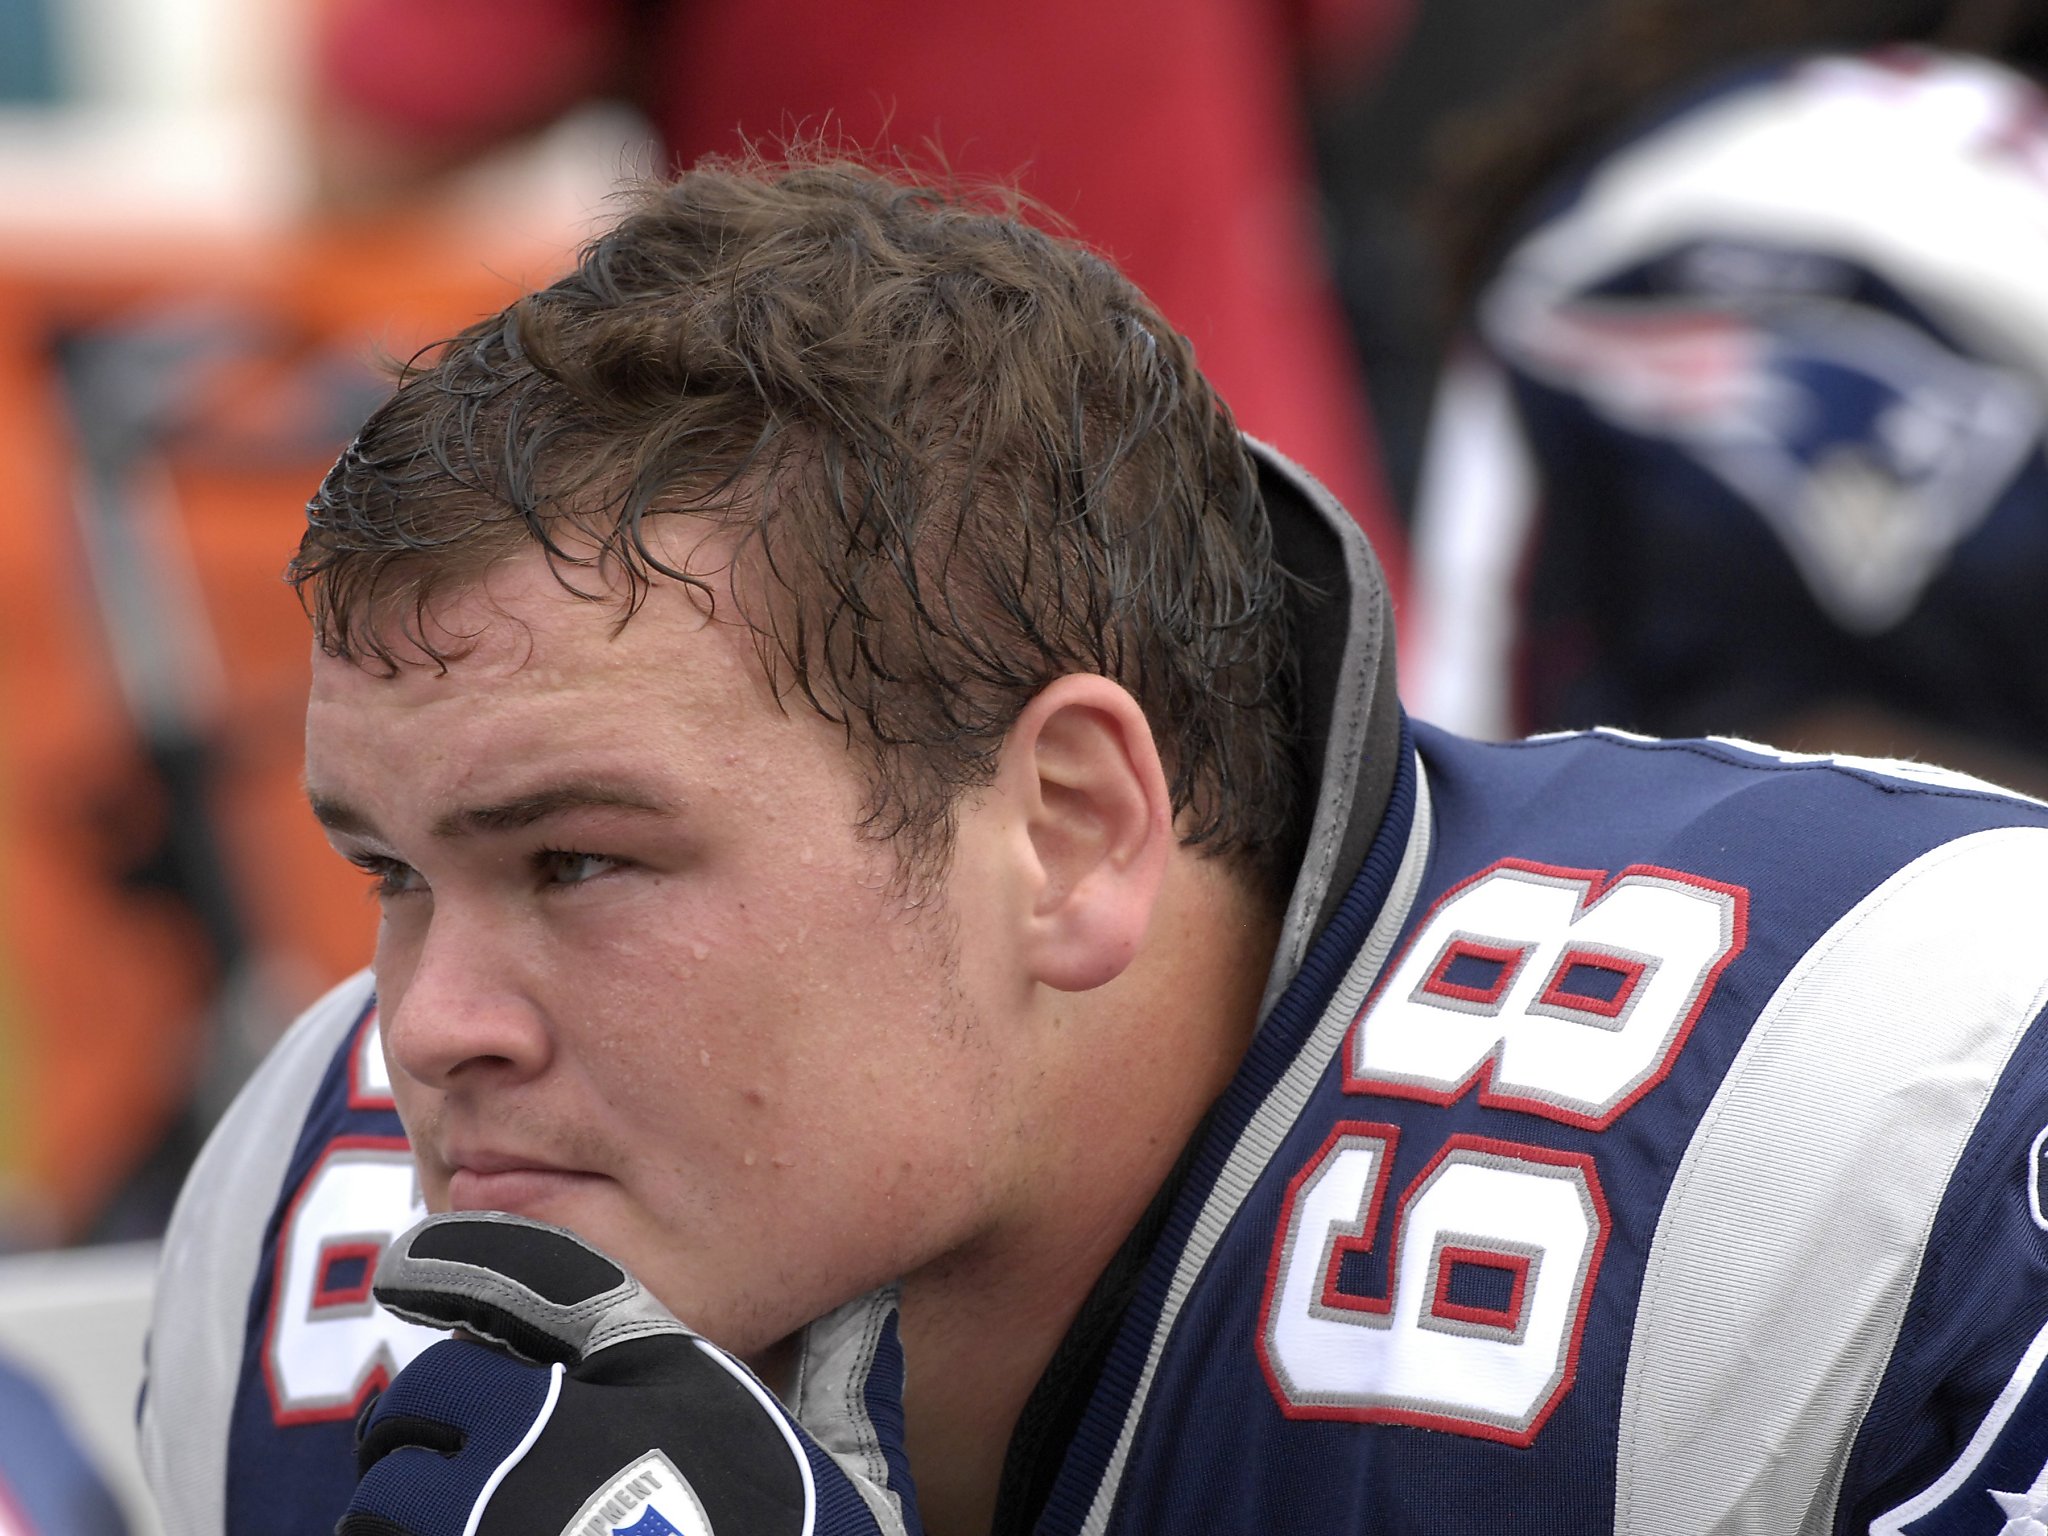 Support pours in for gay ex-NFL player Ryan O’Callaghan